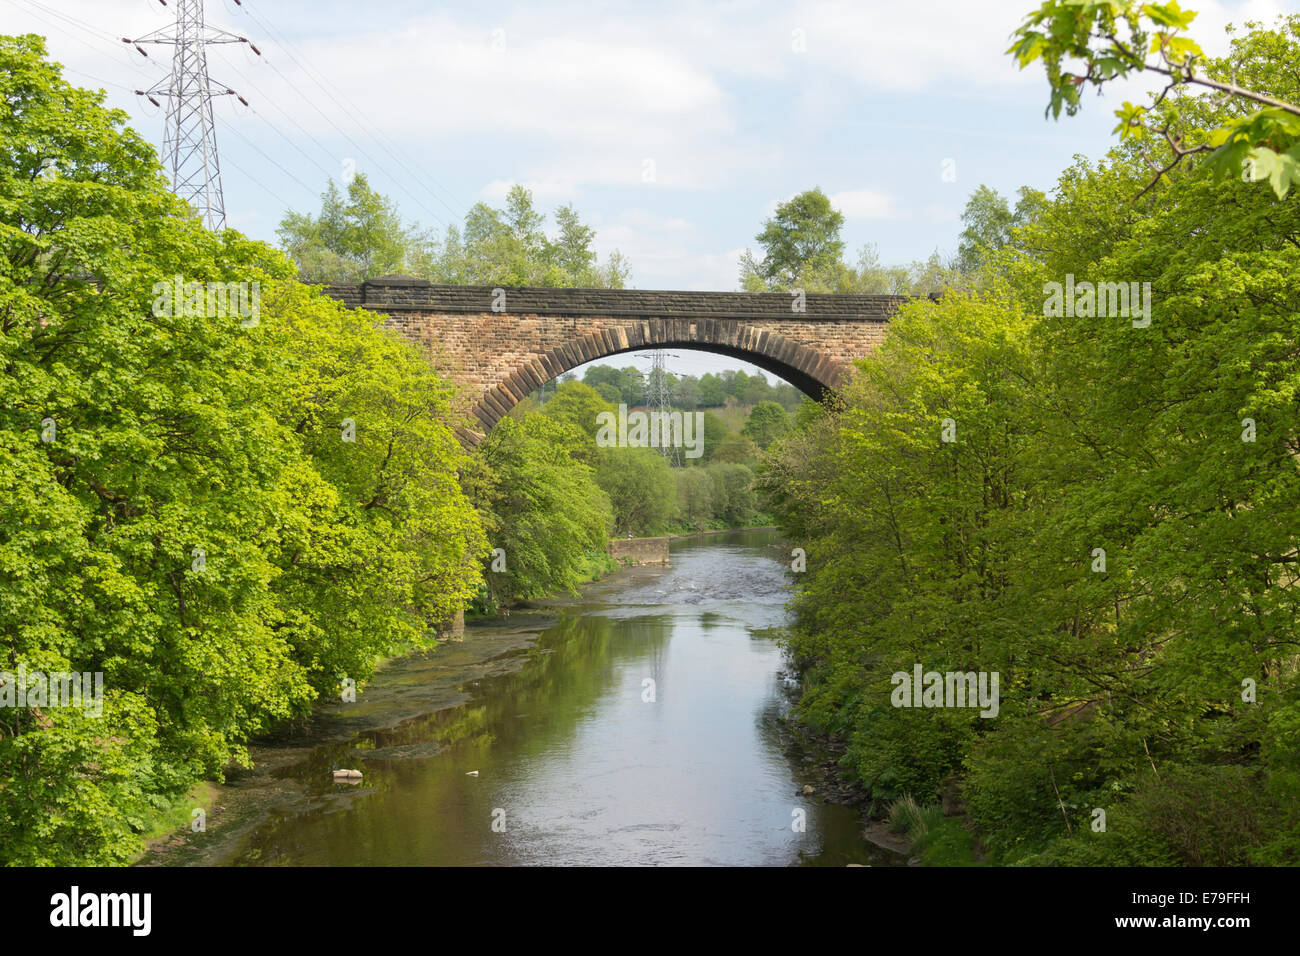 One arch of the Clifton viaduct, known locally as the13 arch viaduct, where is crosses the river Irwell in Philips Park, Prestwi Stock Photo